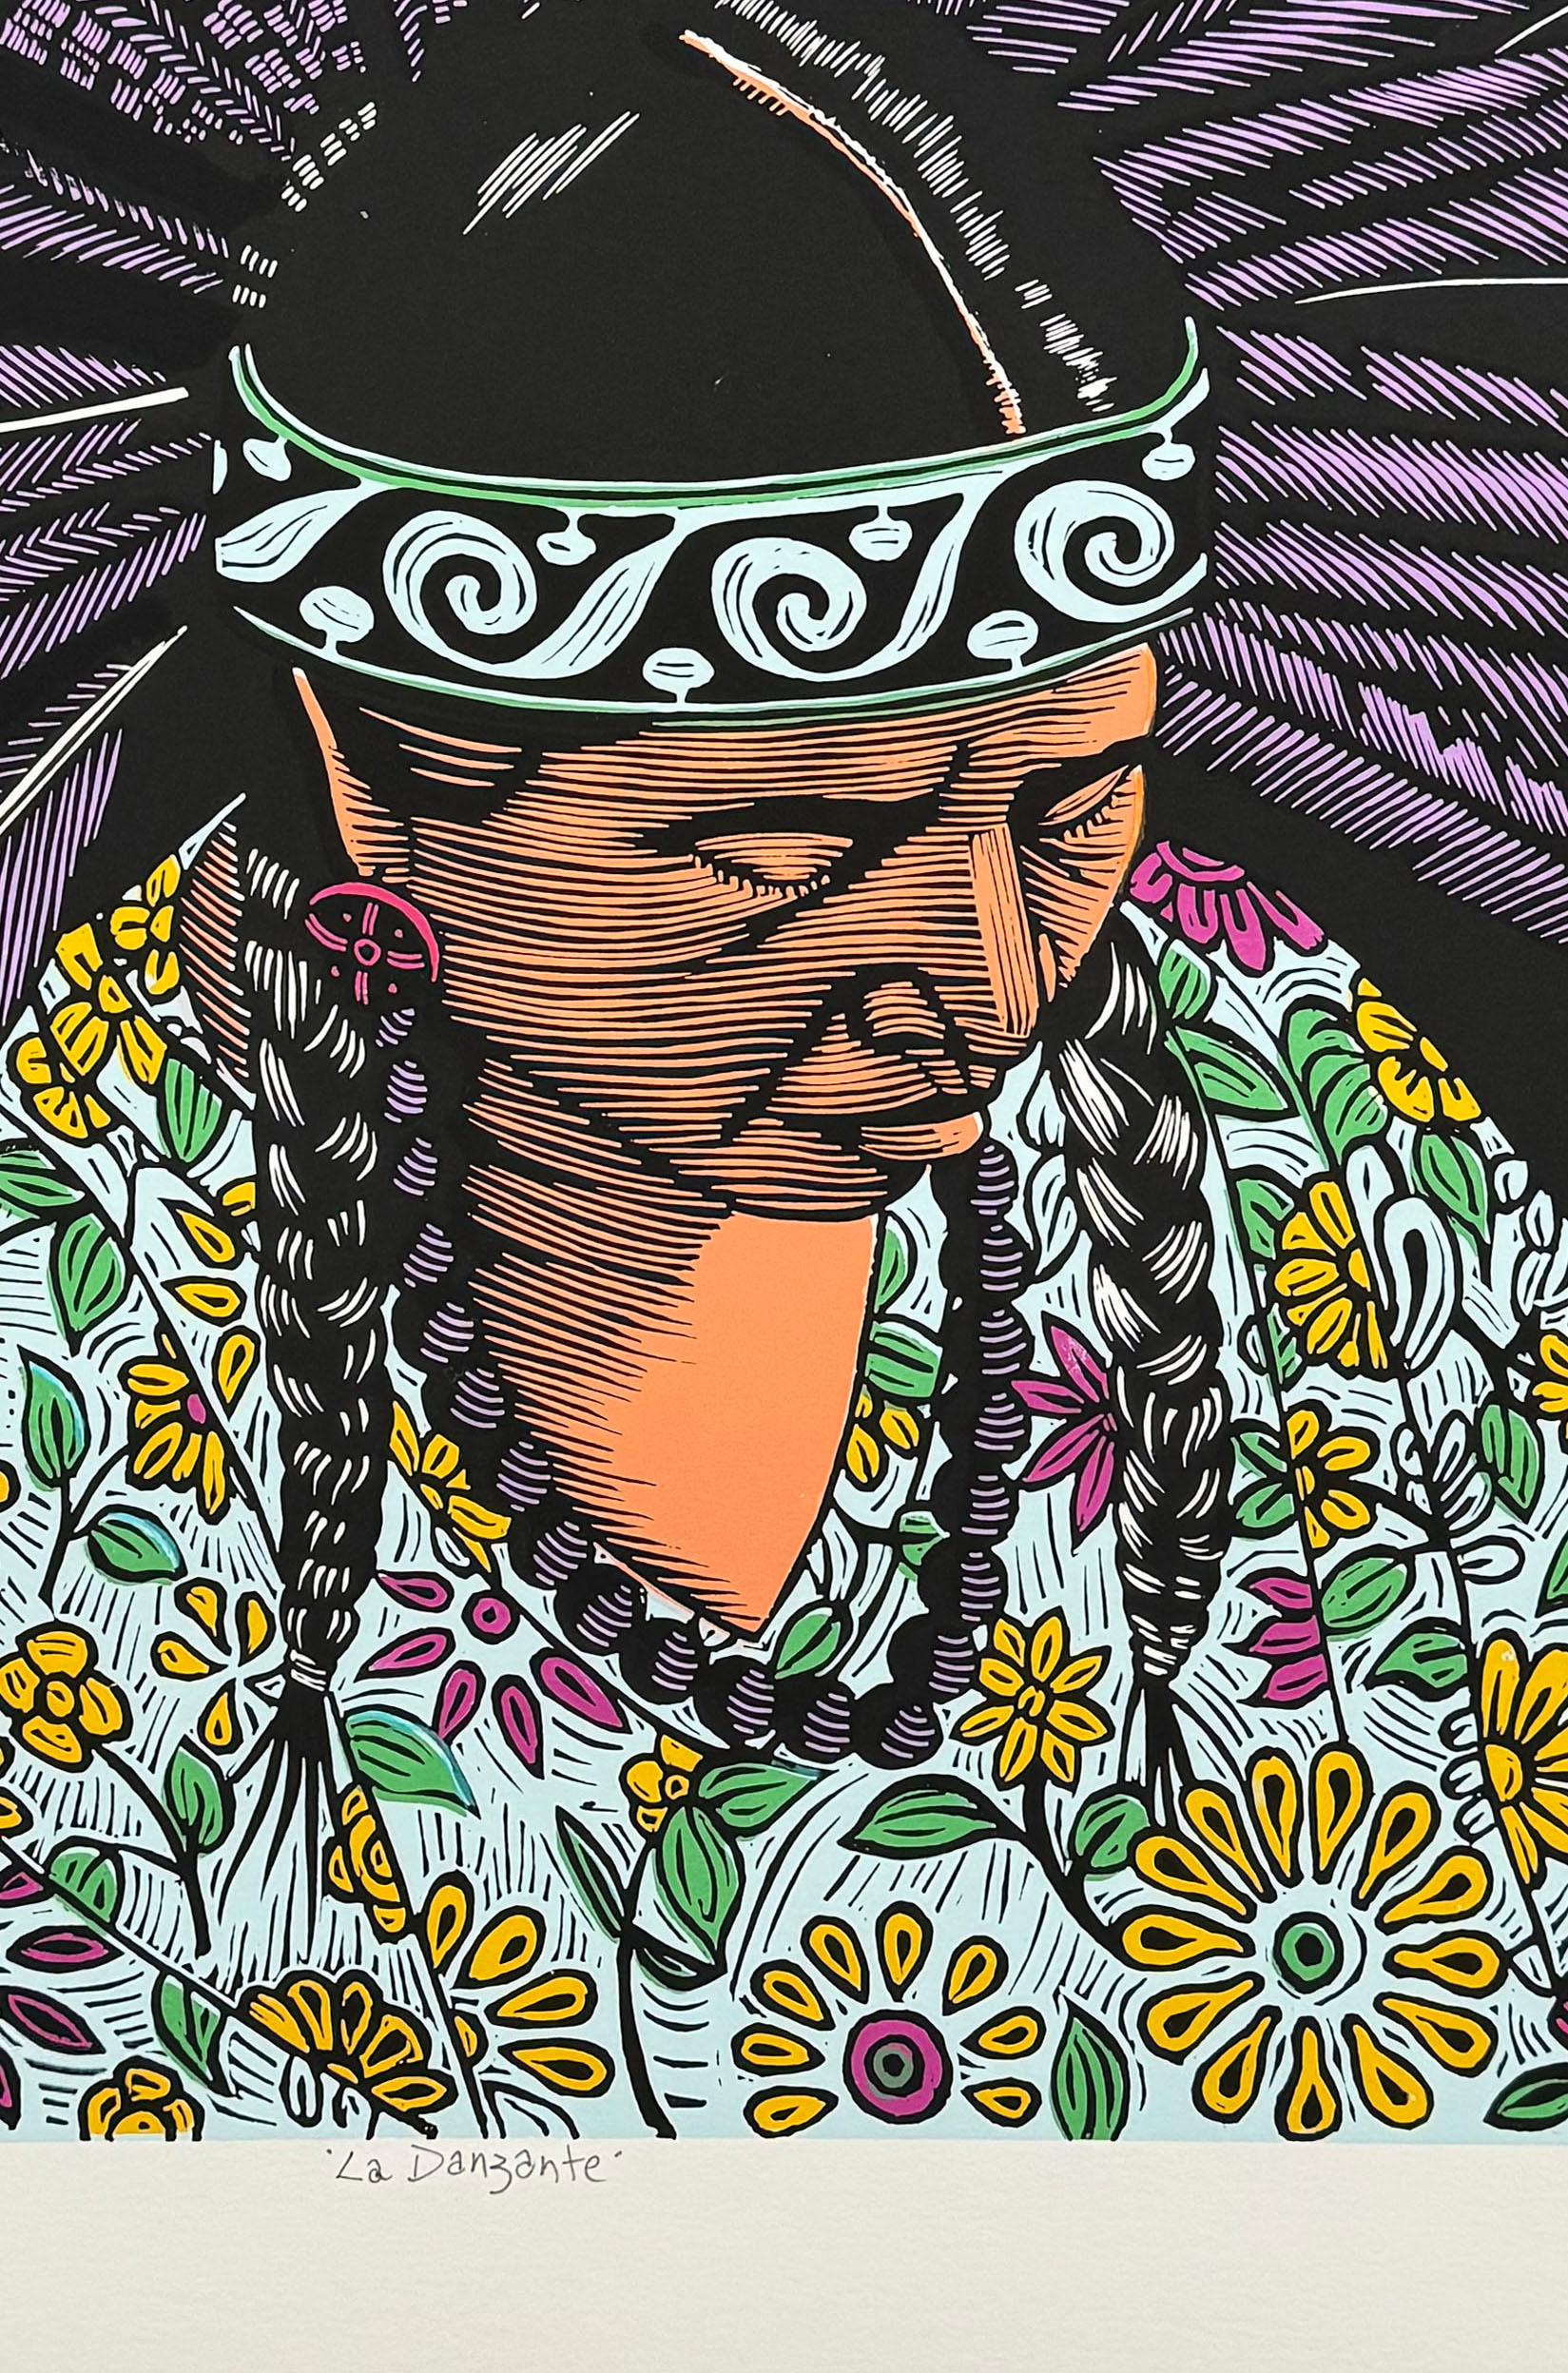 Medium: Screenprint
Year: 2019
Image Size: 24 x 24 inches
Edition Size: 10

Image of a native American woman in traditional garb and ceremonial dance.

As a cultural activist/artist/printmaker, Juan Fuentes has dedicated his career to being part of